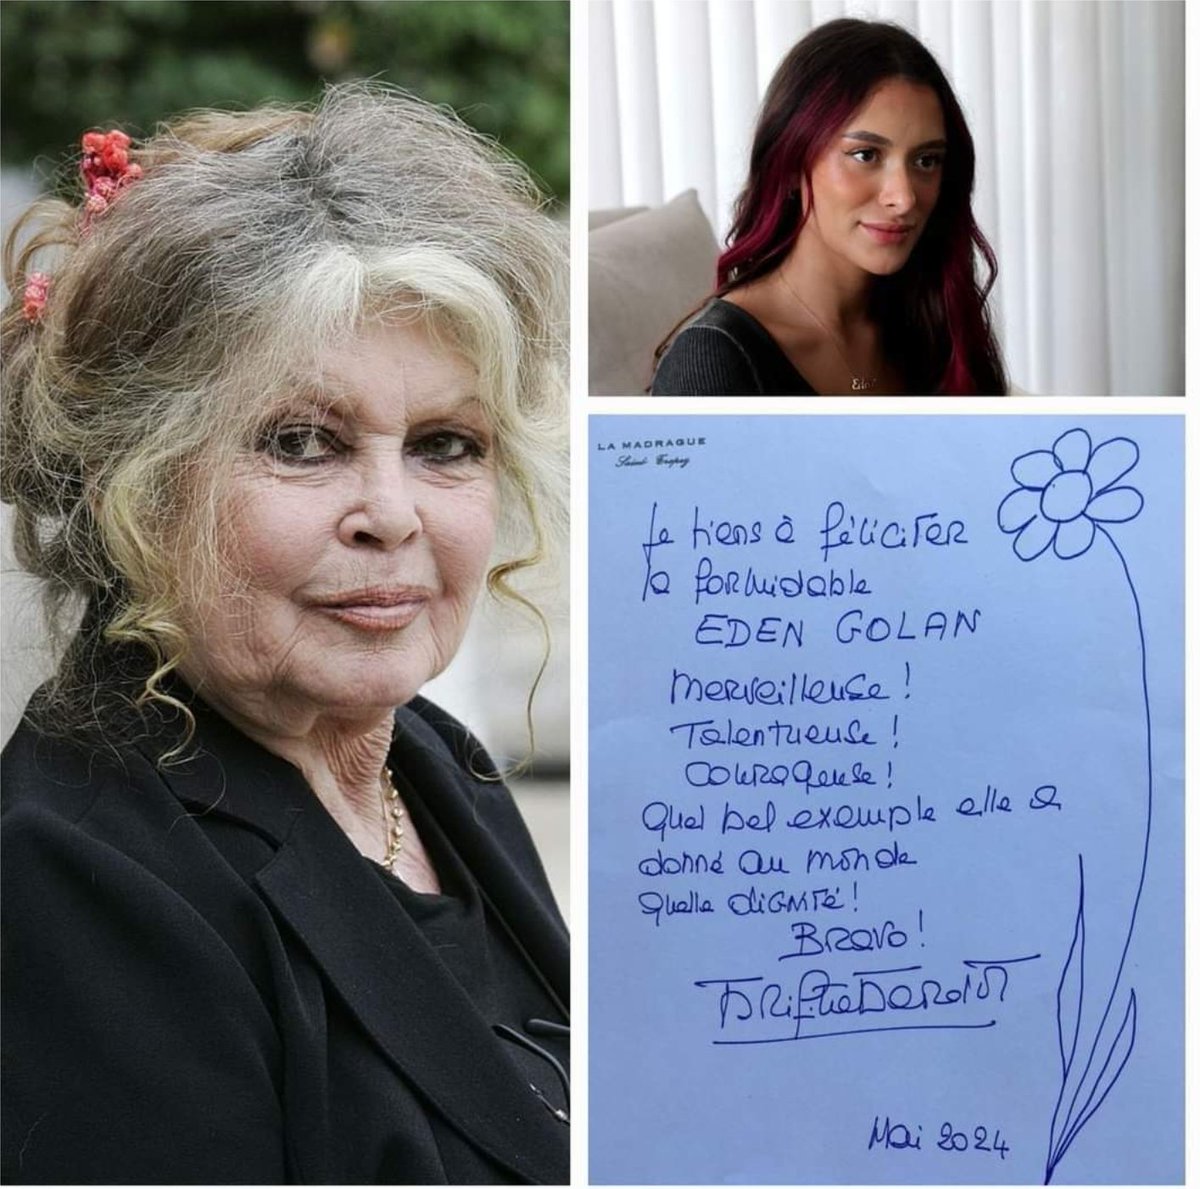 On May 13, the legend of French cinema, 89-year-old Brigitte Bardeaux posted an enthusiastic reflection on Eden Golan on her social networks - a screen shot of a note with a flower written by her hand

Want to congratulate the amazing Eden Golan. Wonderful ! Talented girl! Brave!